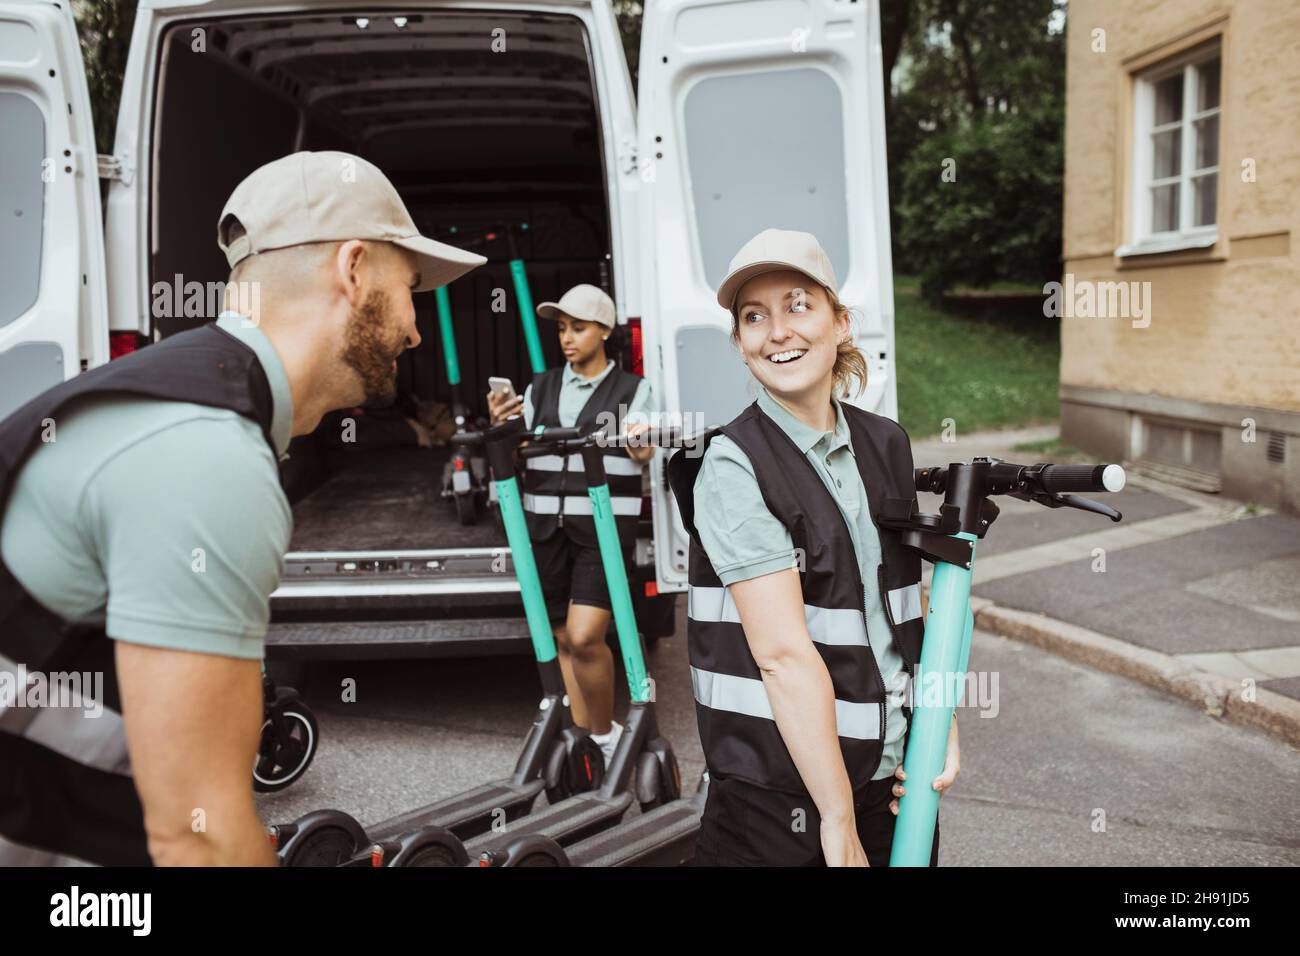 Smiling delivery woman looking at male coworker while loading push scooter in van Stock Photo